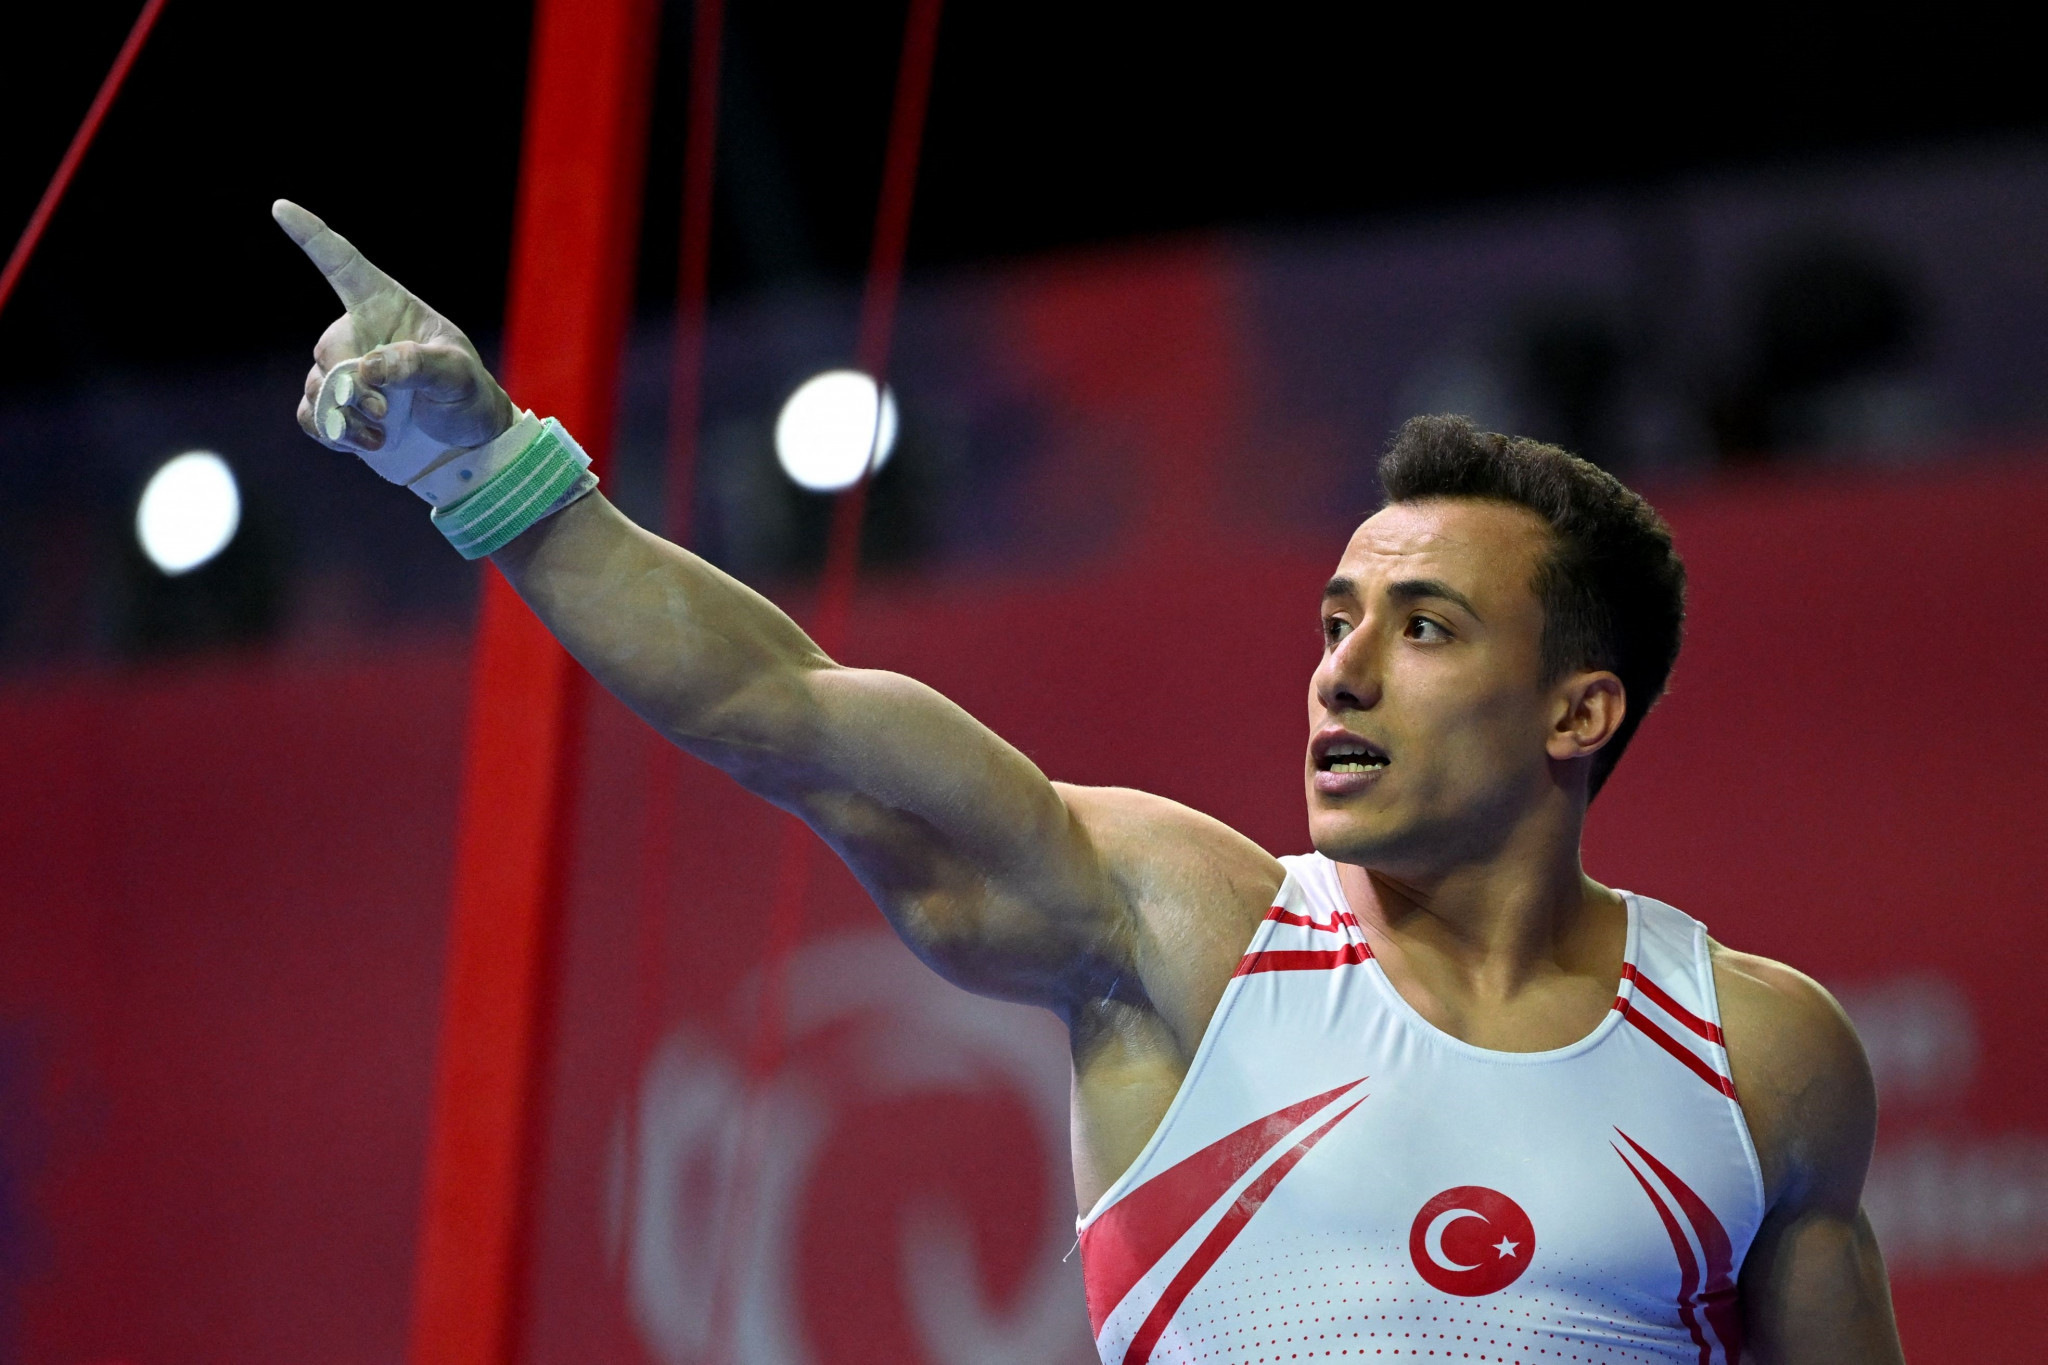 Adem Asil of Turkey won rings gold to add to his all-around title in Antalya ©Getty Images